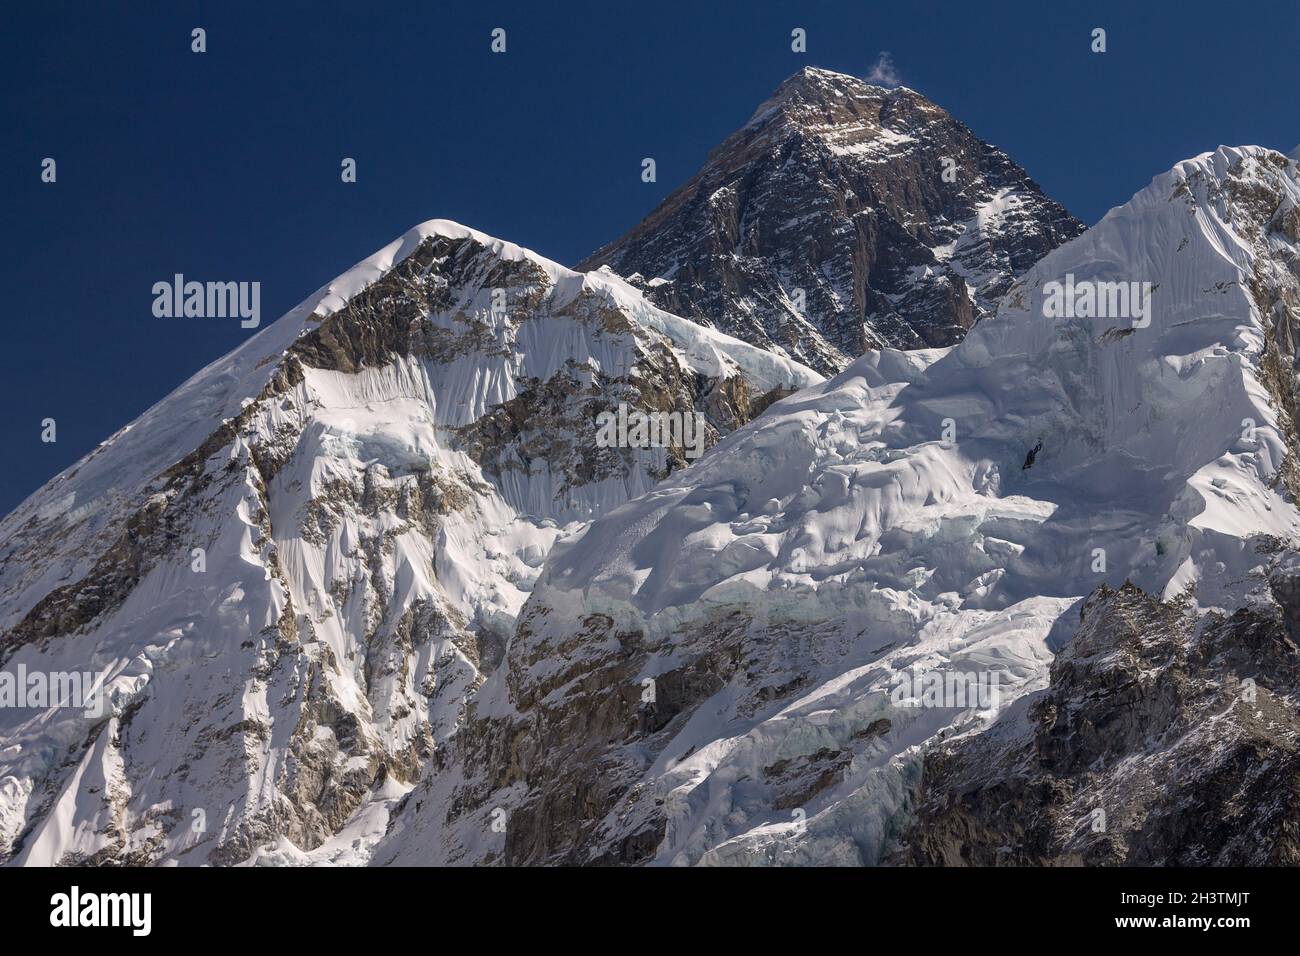 Mount Everest seen from the way to Kala Patthar Stock Photo